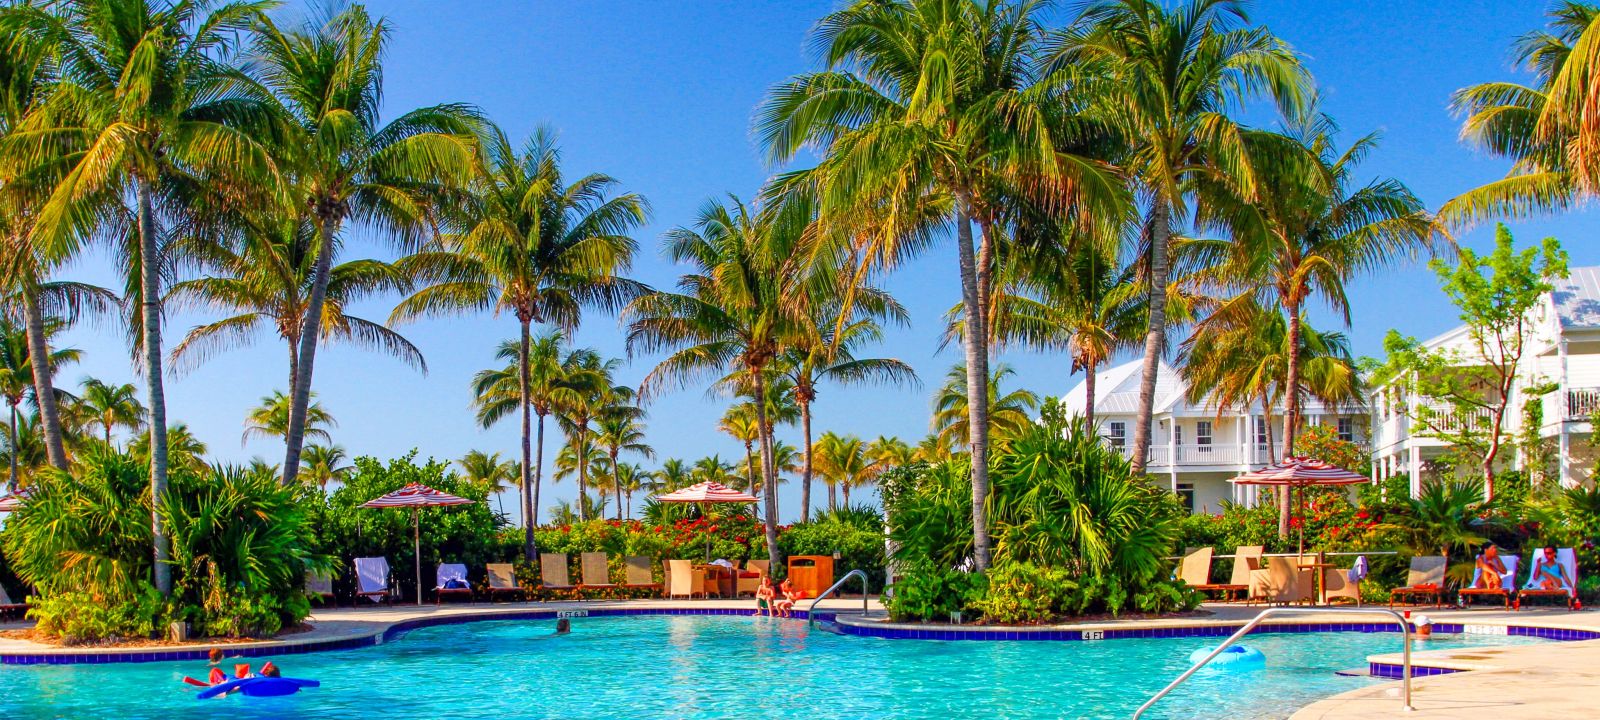 A Pool Next To A Body Of Water Surrounded By Palm Trees